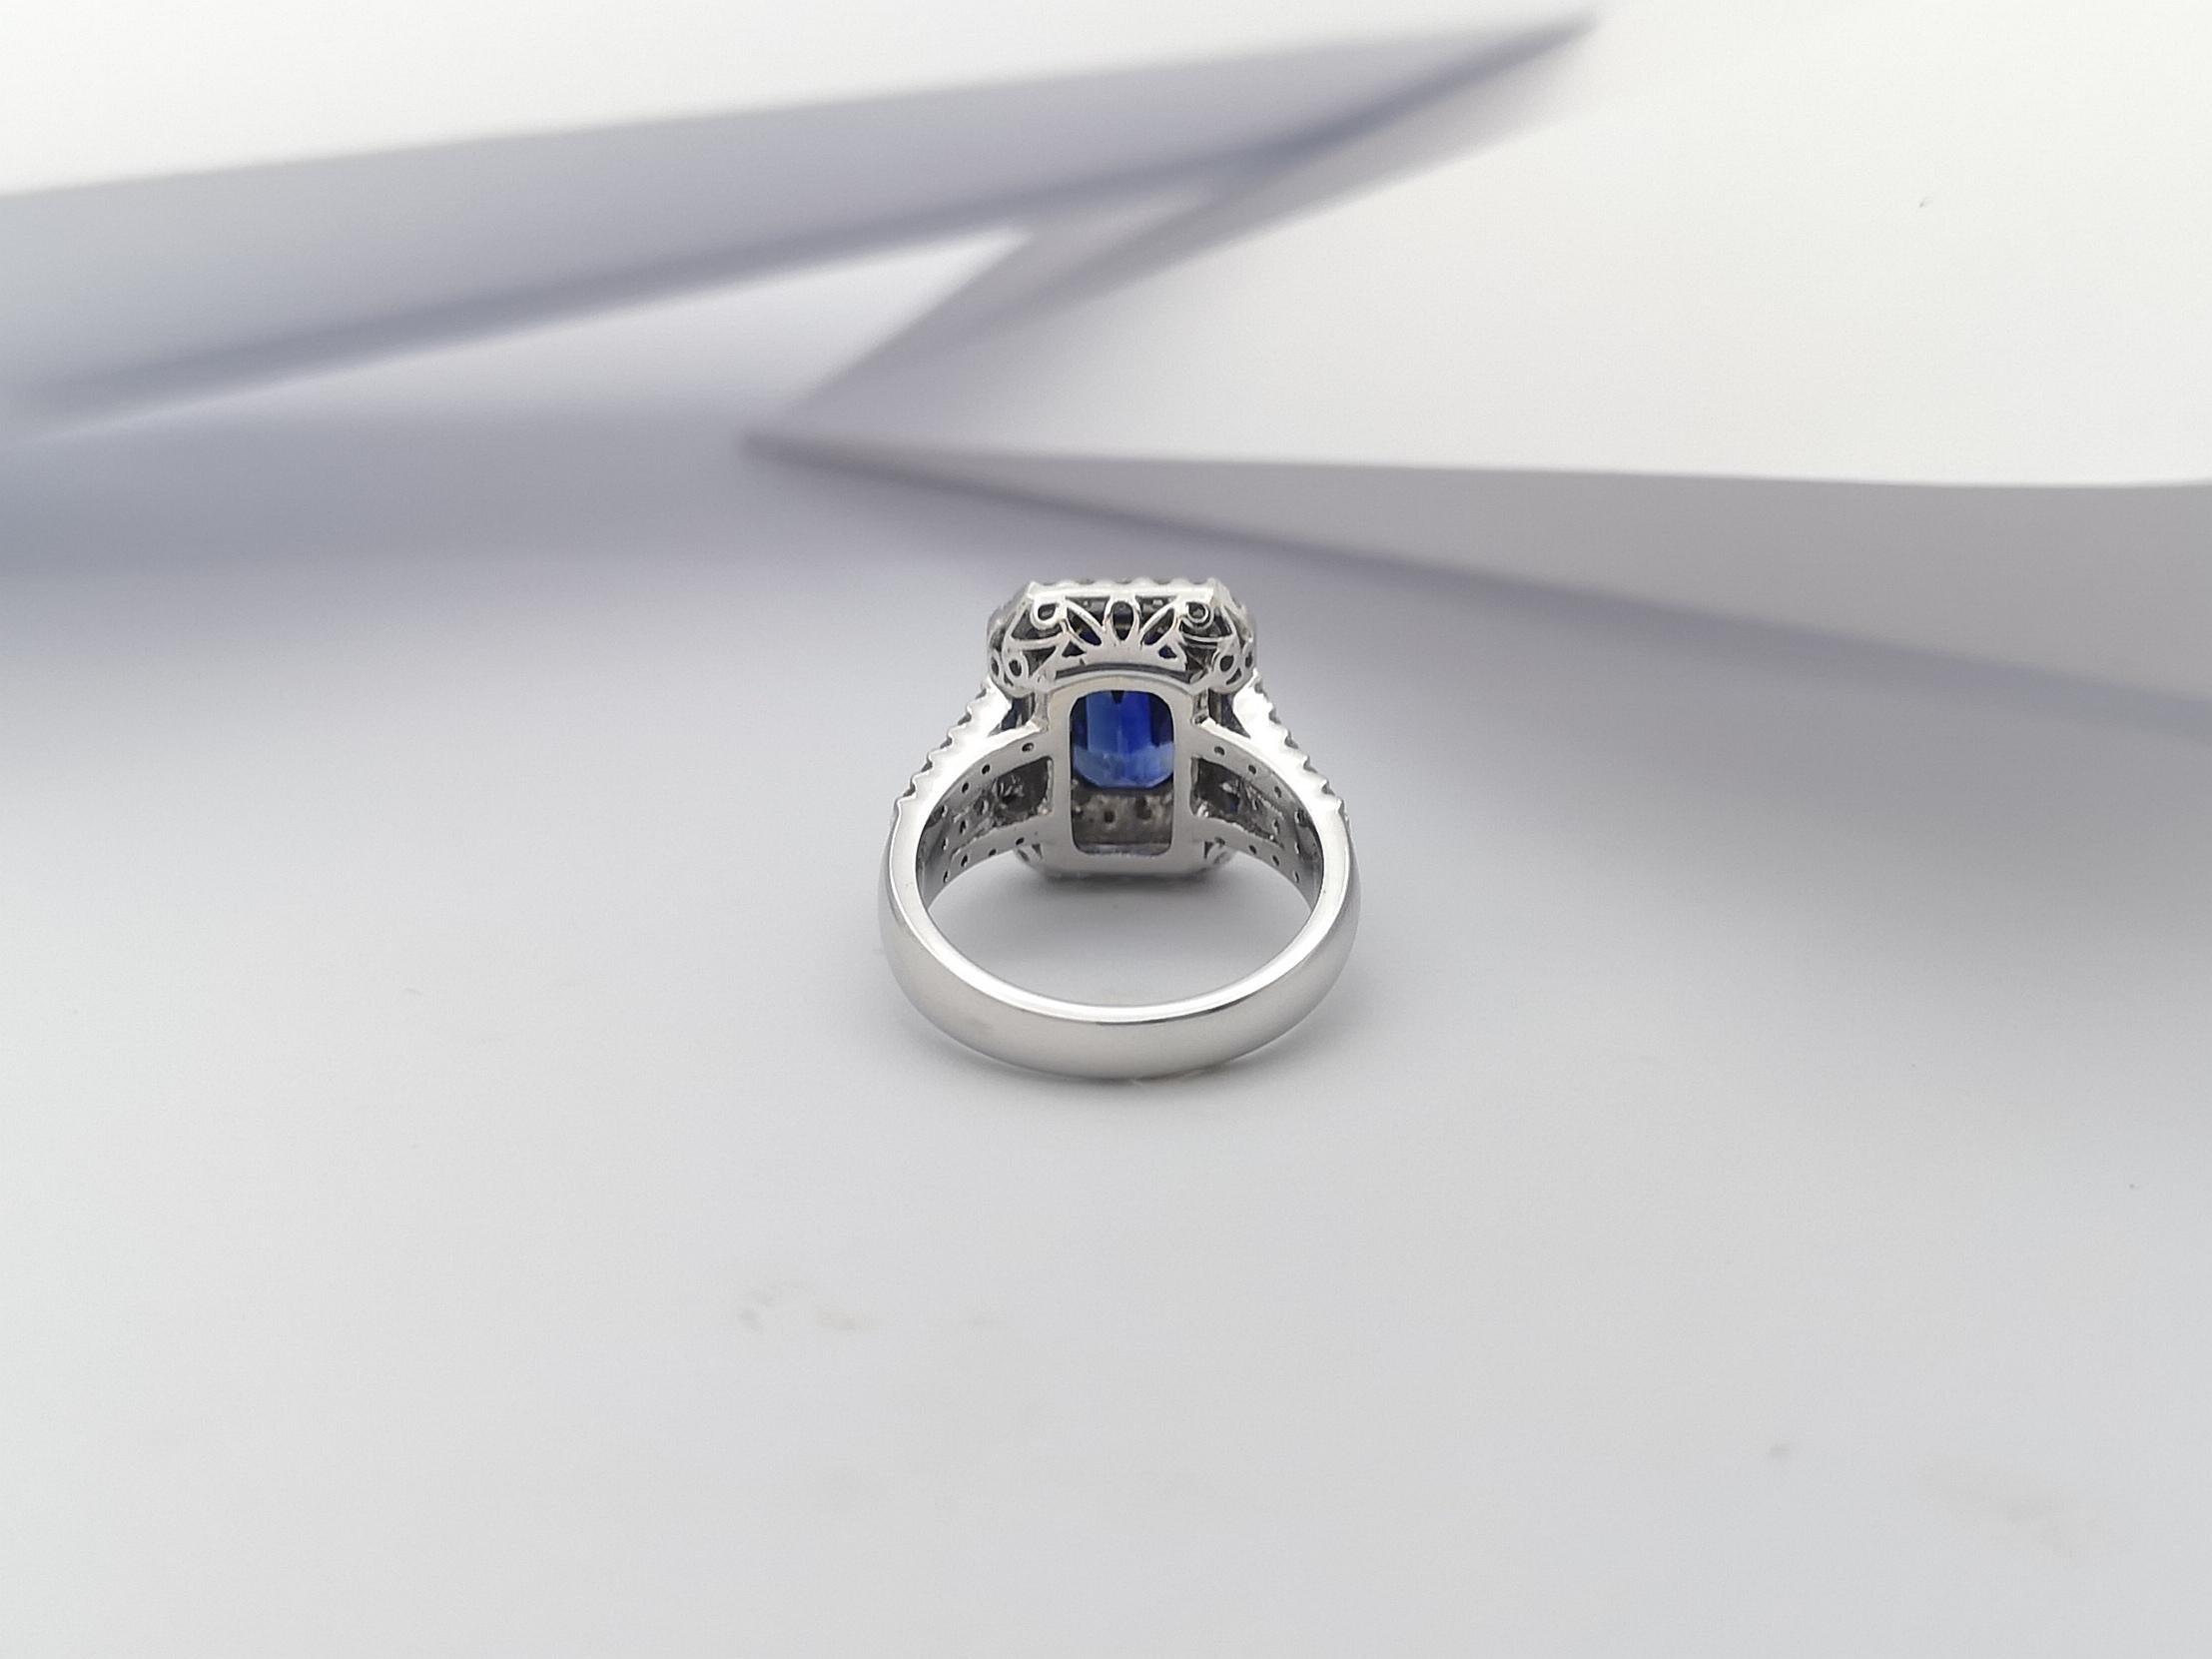 GIA Certified 3 Cts Blue Sapphire with Diamond Ring Set in 18 Karat White Gold For Sale 6